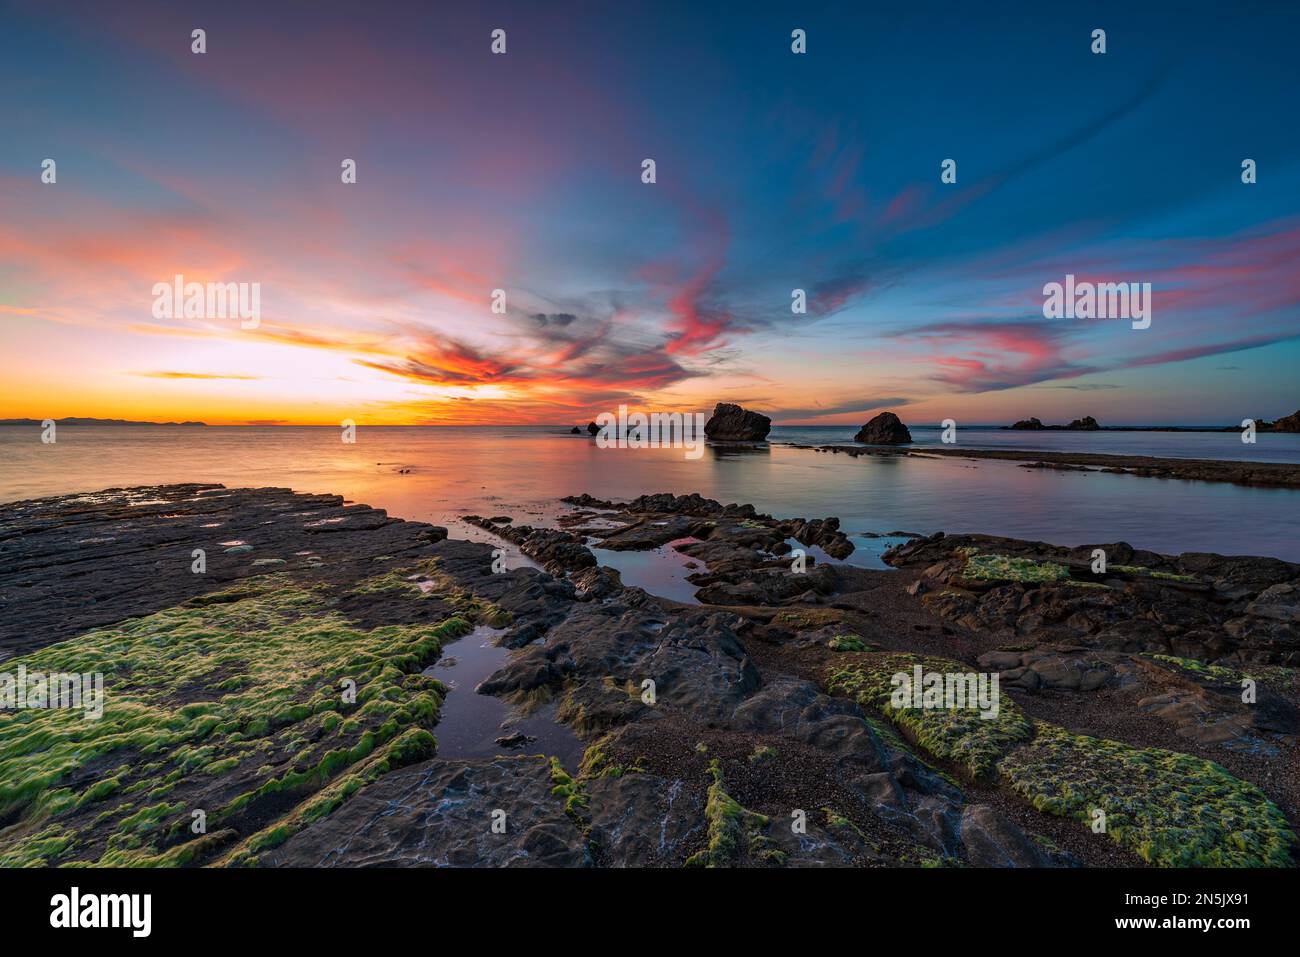 The sun sets behind the rocks of Settefrati beach, Sicily Stock Photo